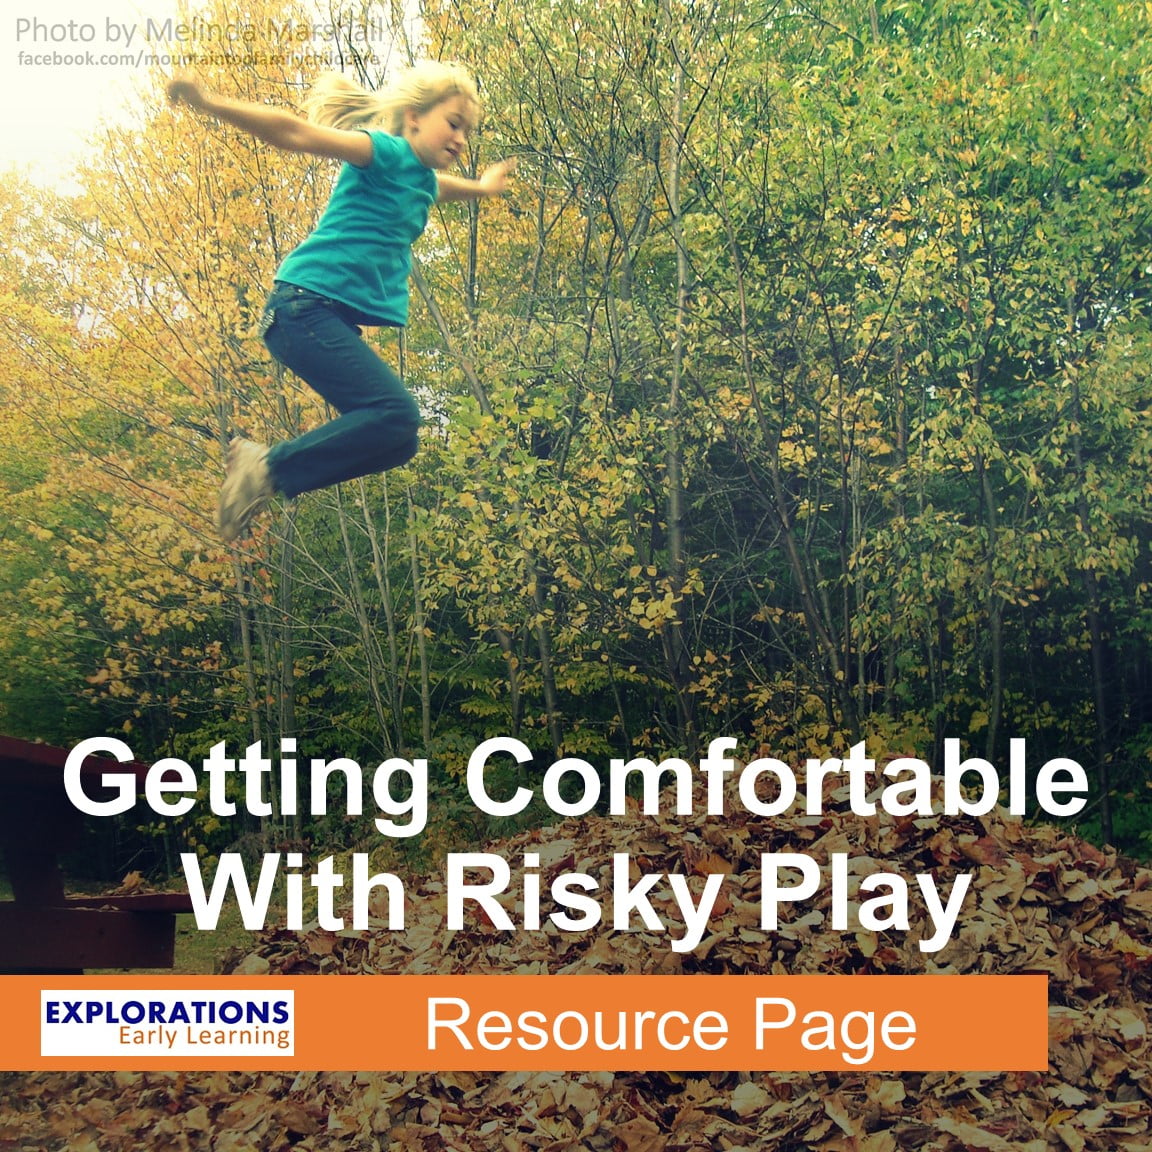 Getting Comfortable With Risky Play | Resource Page